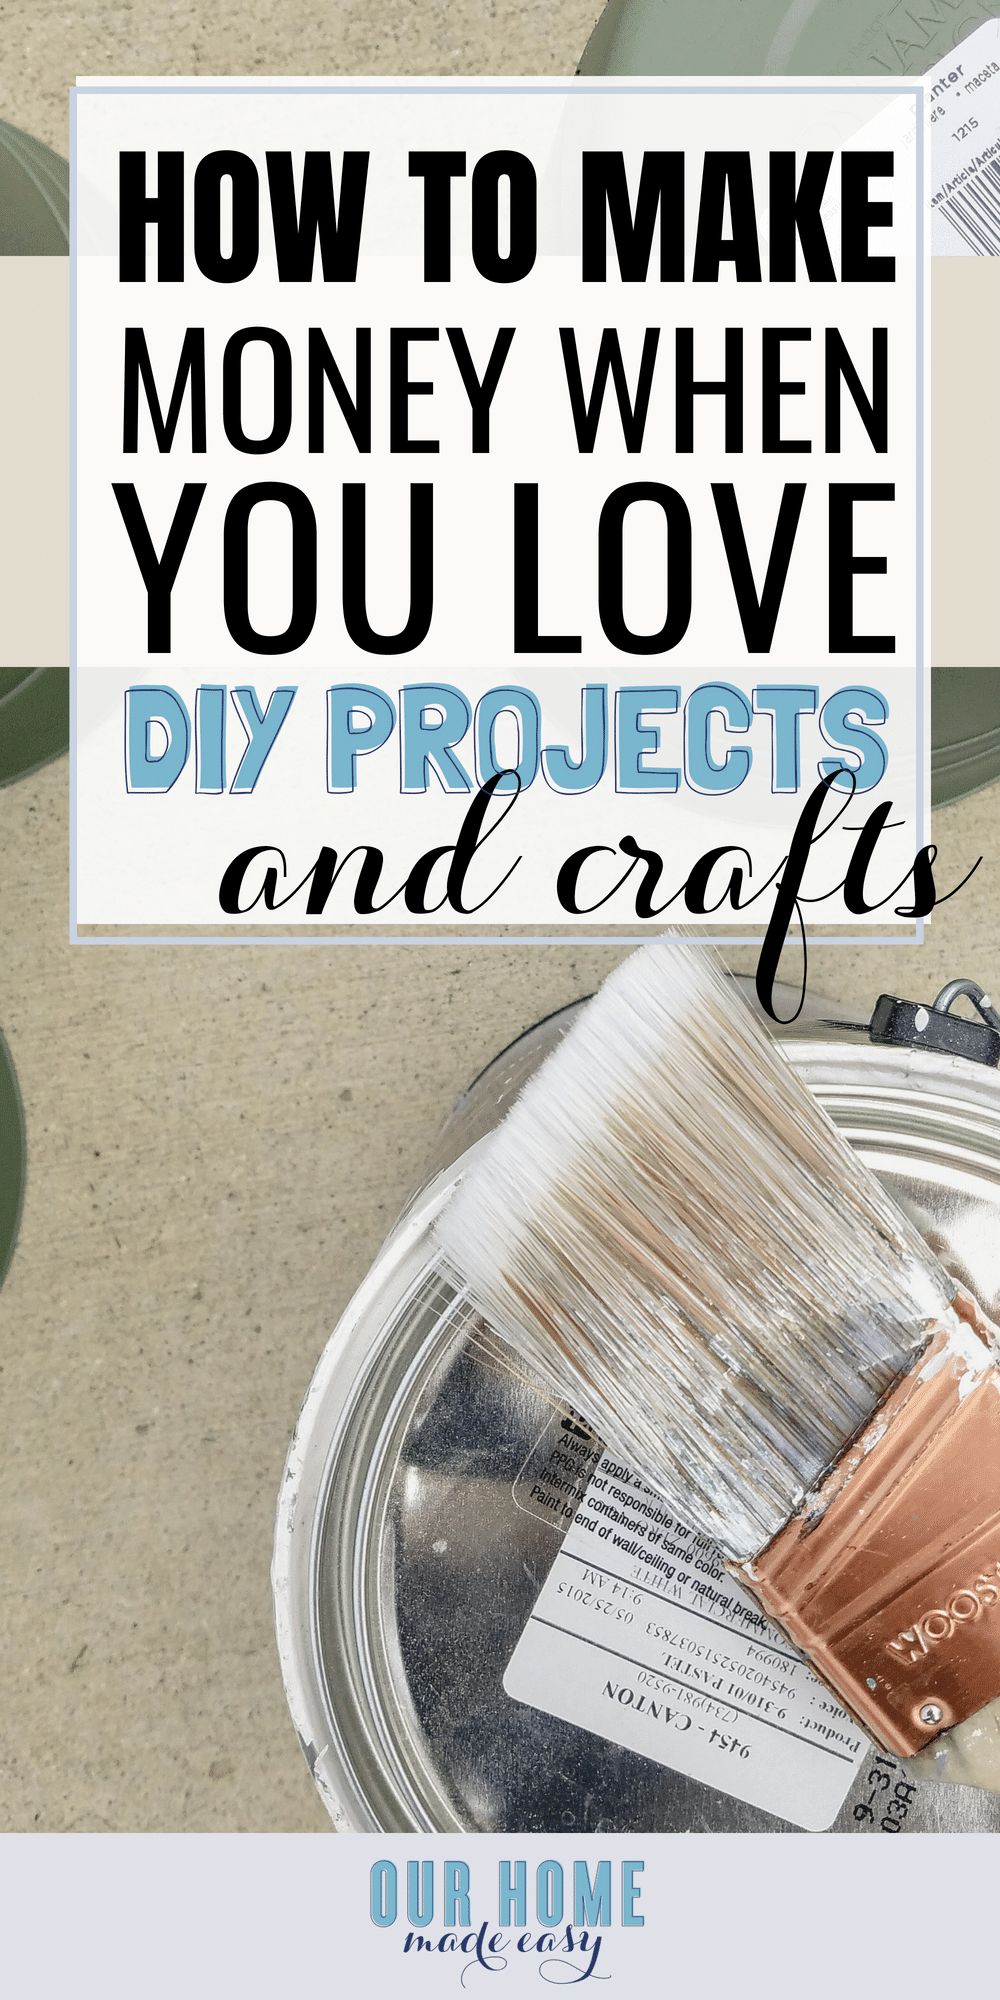 Make money with your love for DIY & crafting with Elite Blog Academy. I'm sharing my experience and how you can earn an income doing what you already enjoy!  #blogging #blog